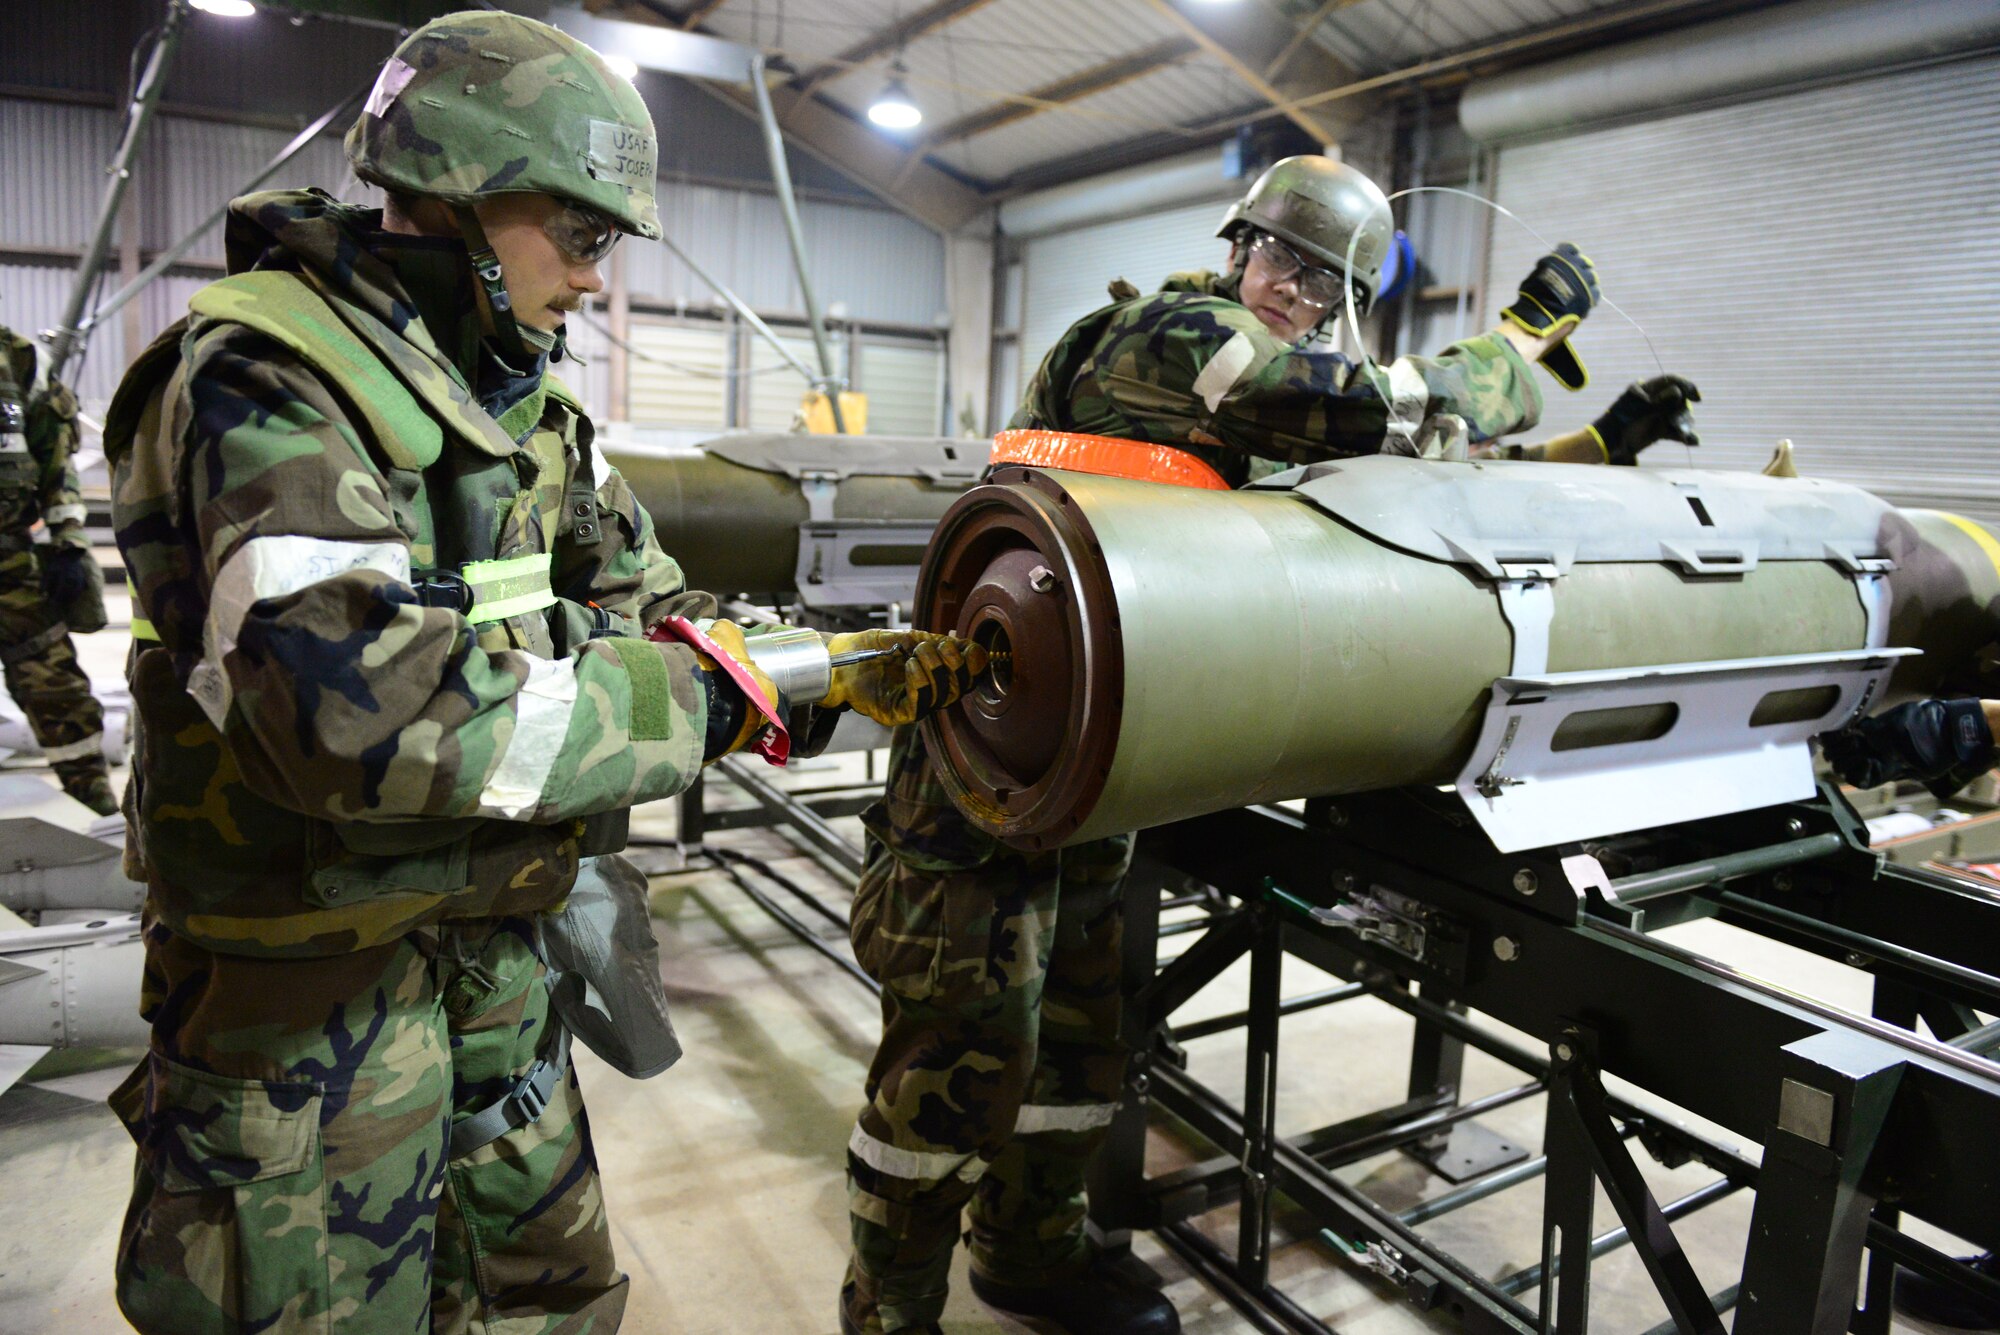 Airmen from the 51st Munitions Squadron assemble various bomb components during exercise Vigilant Ace 16 at Osan Air Base, Republic of Korea, Nov. 6, 2015. The sensitivity of the devices to radio signals and electricity is something that must be kept in mind during each construction and requires the establishment of maximum safe distance evacuation points.  (U.S. Air Force photo by Staff Sgt. Amber Grimm/Released)